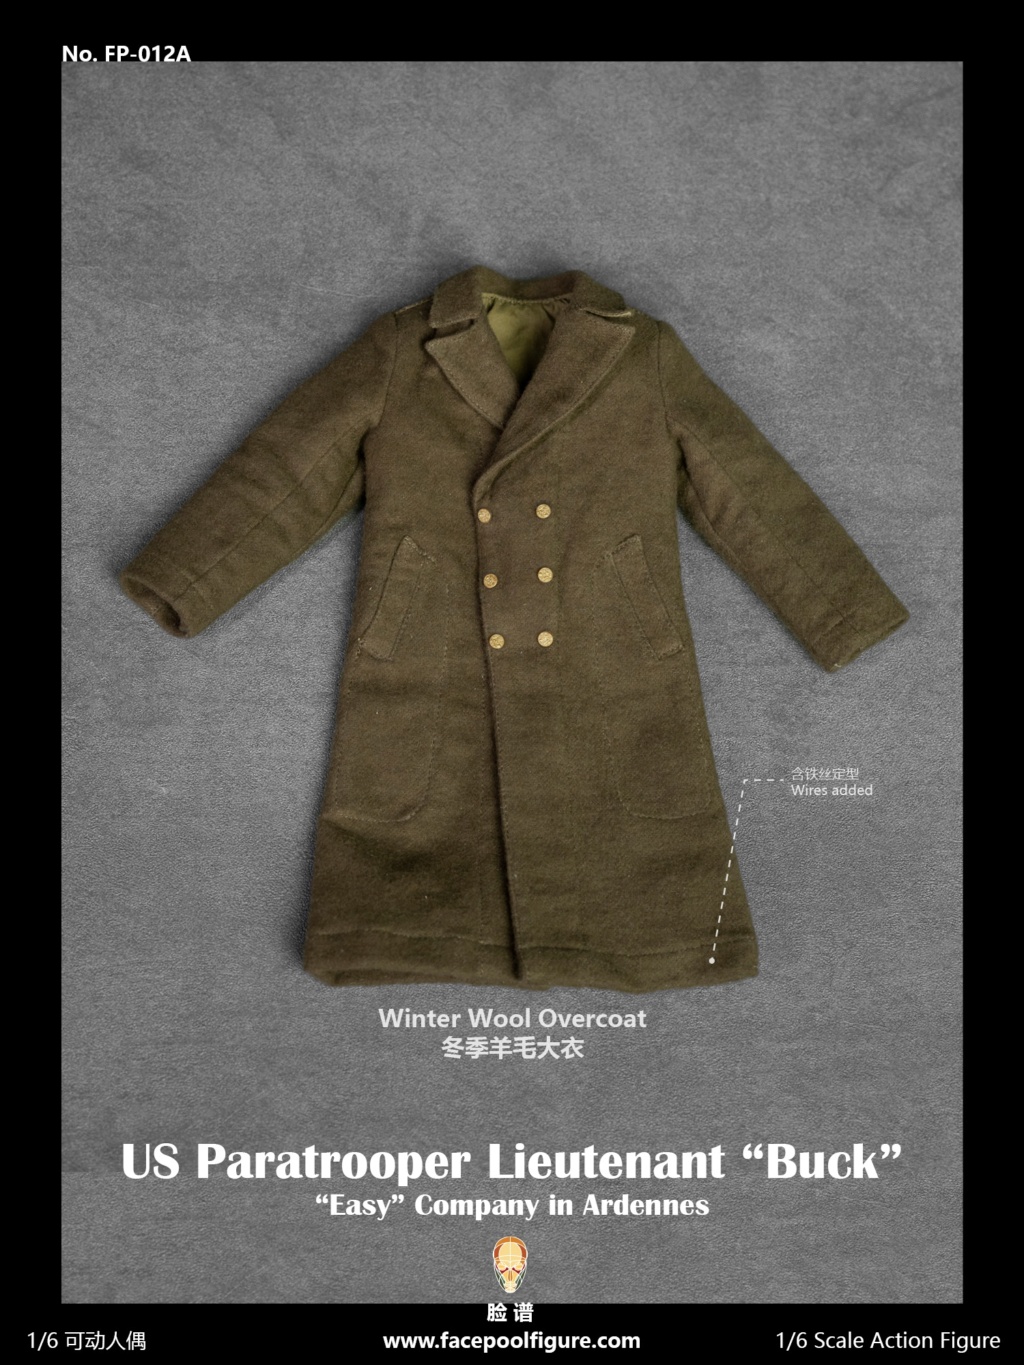 historical - NEW PRODUCT: Facepool: 1/6 Scale US Paratrooper Lieutenant “Buck” (FP012A & B) (2 versions) 10142910